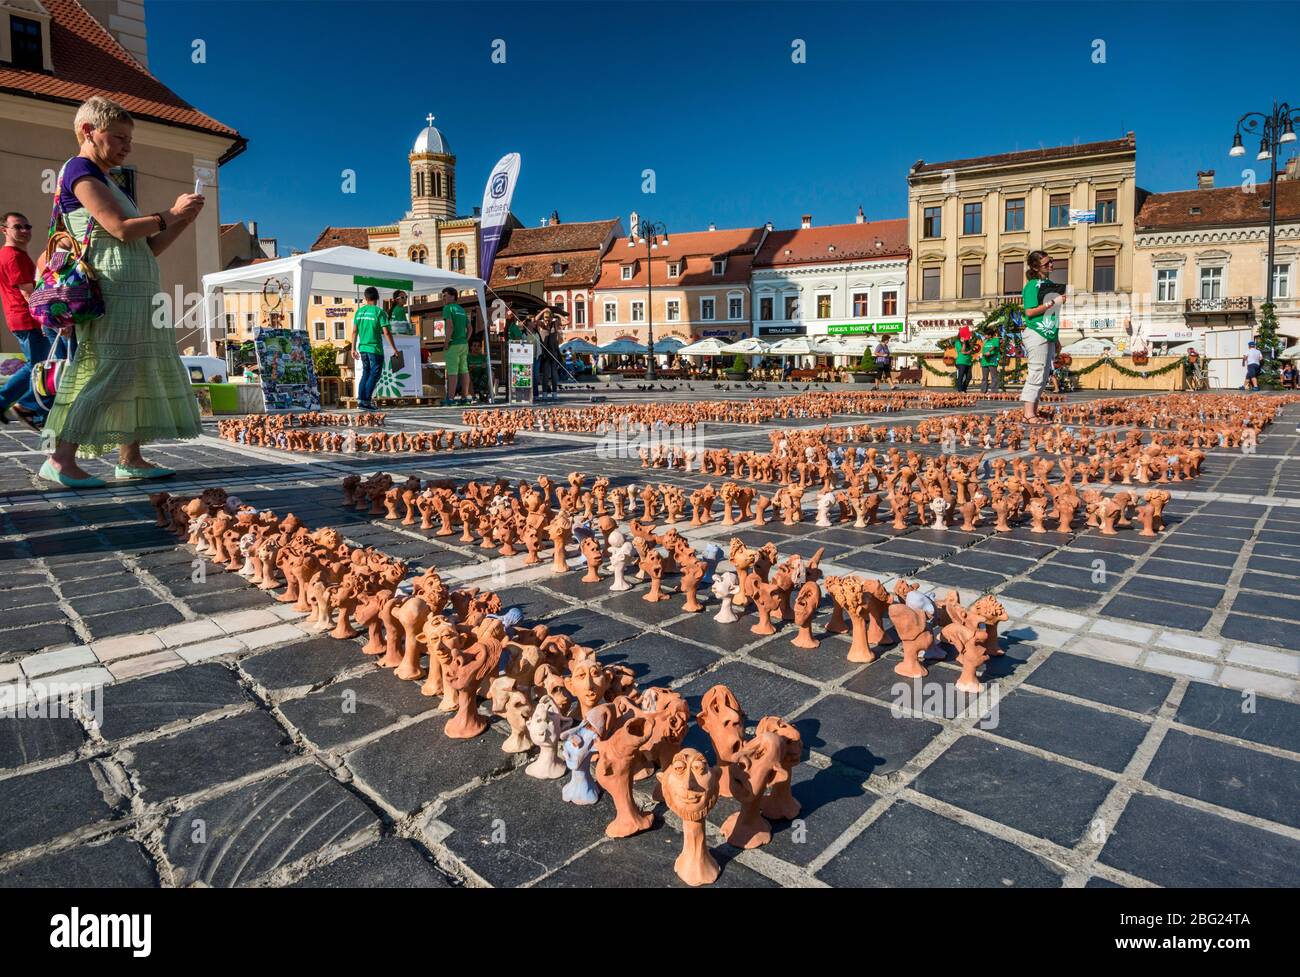 Display by Hospice Romania, designed to increase diabetes awareness, made by father of sick child, at Piata Sfatului, in Brasov, Transylvania, Romania Stock Photo